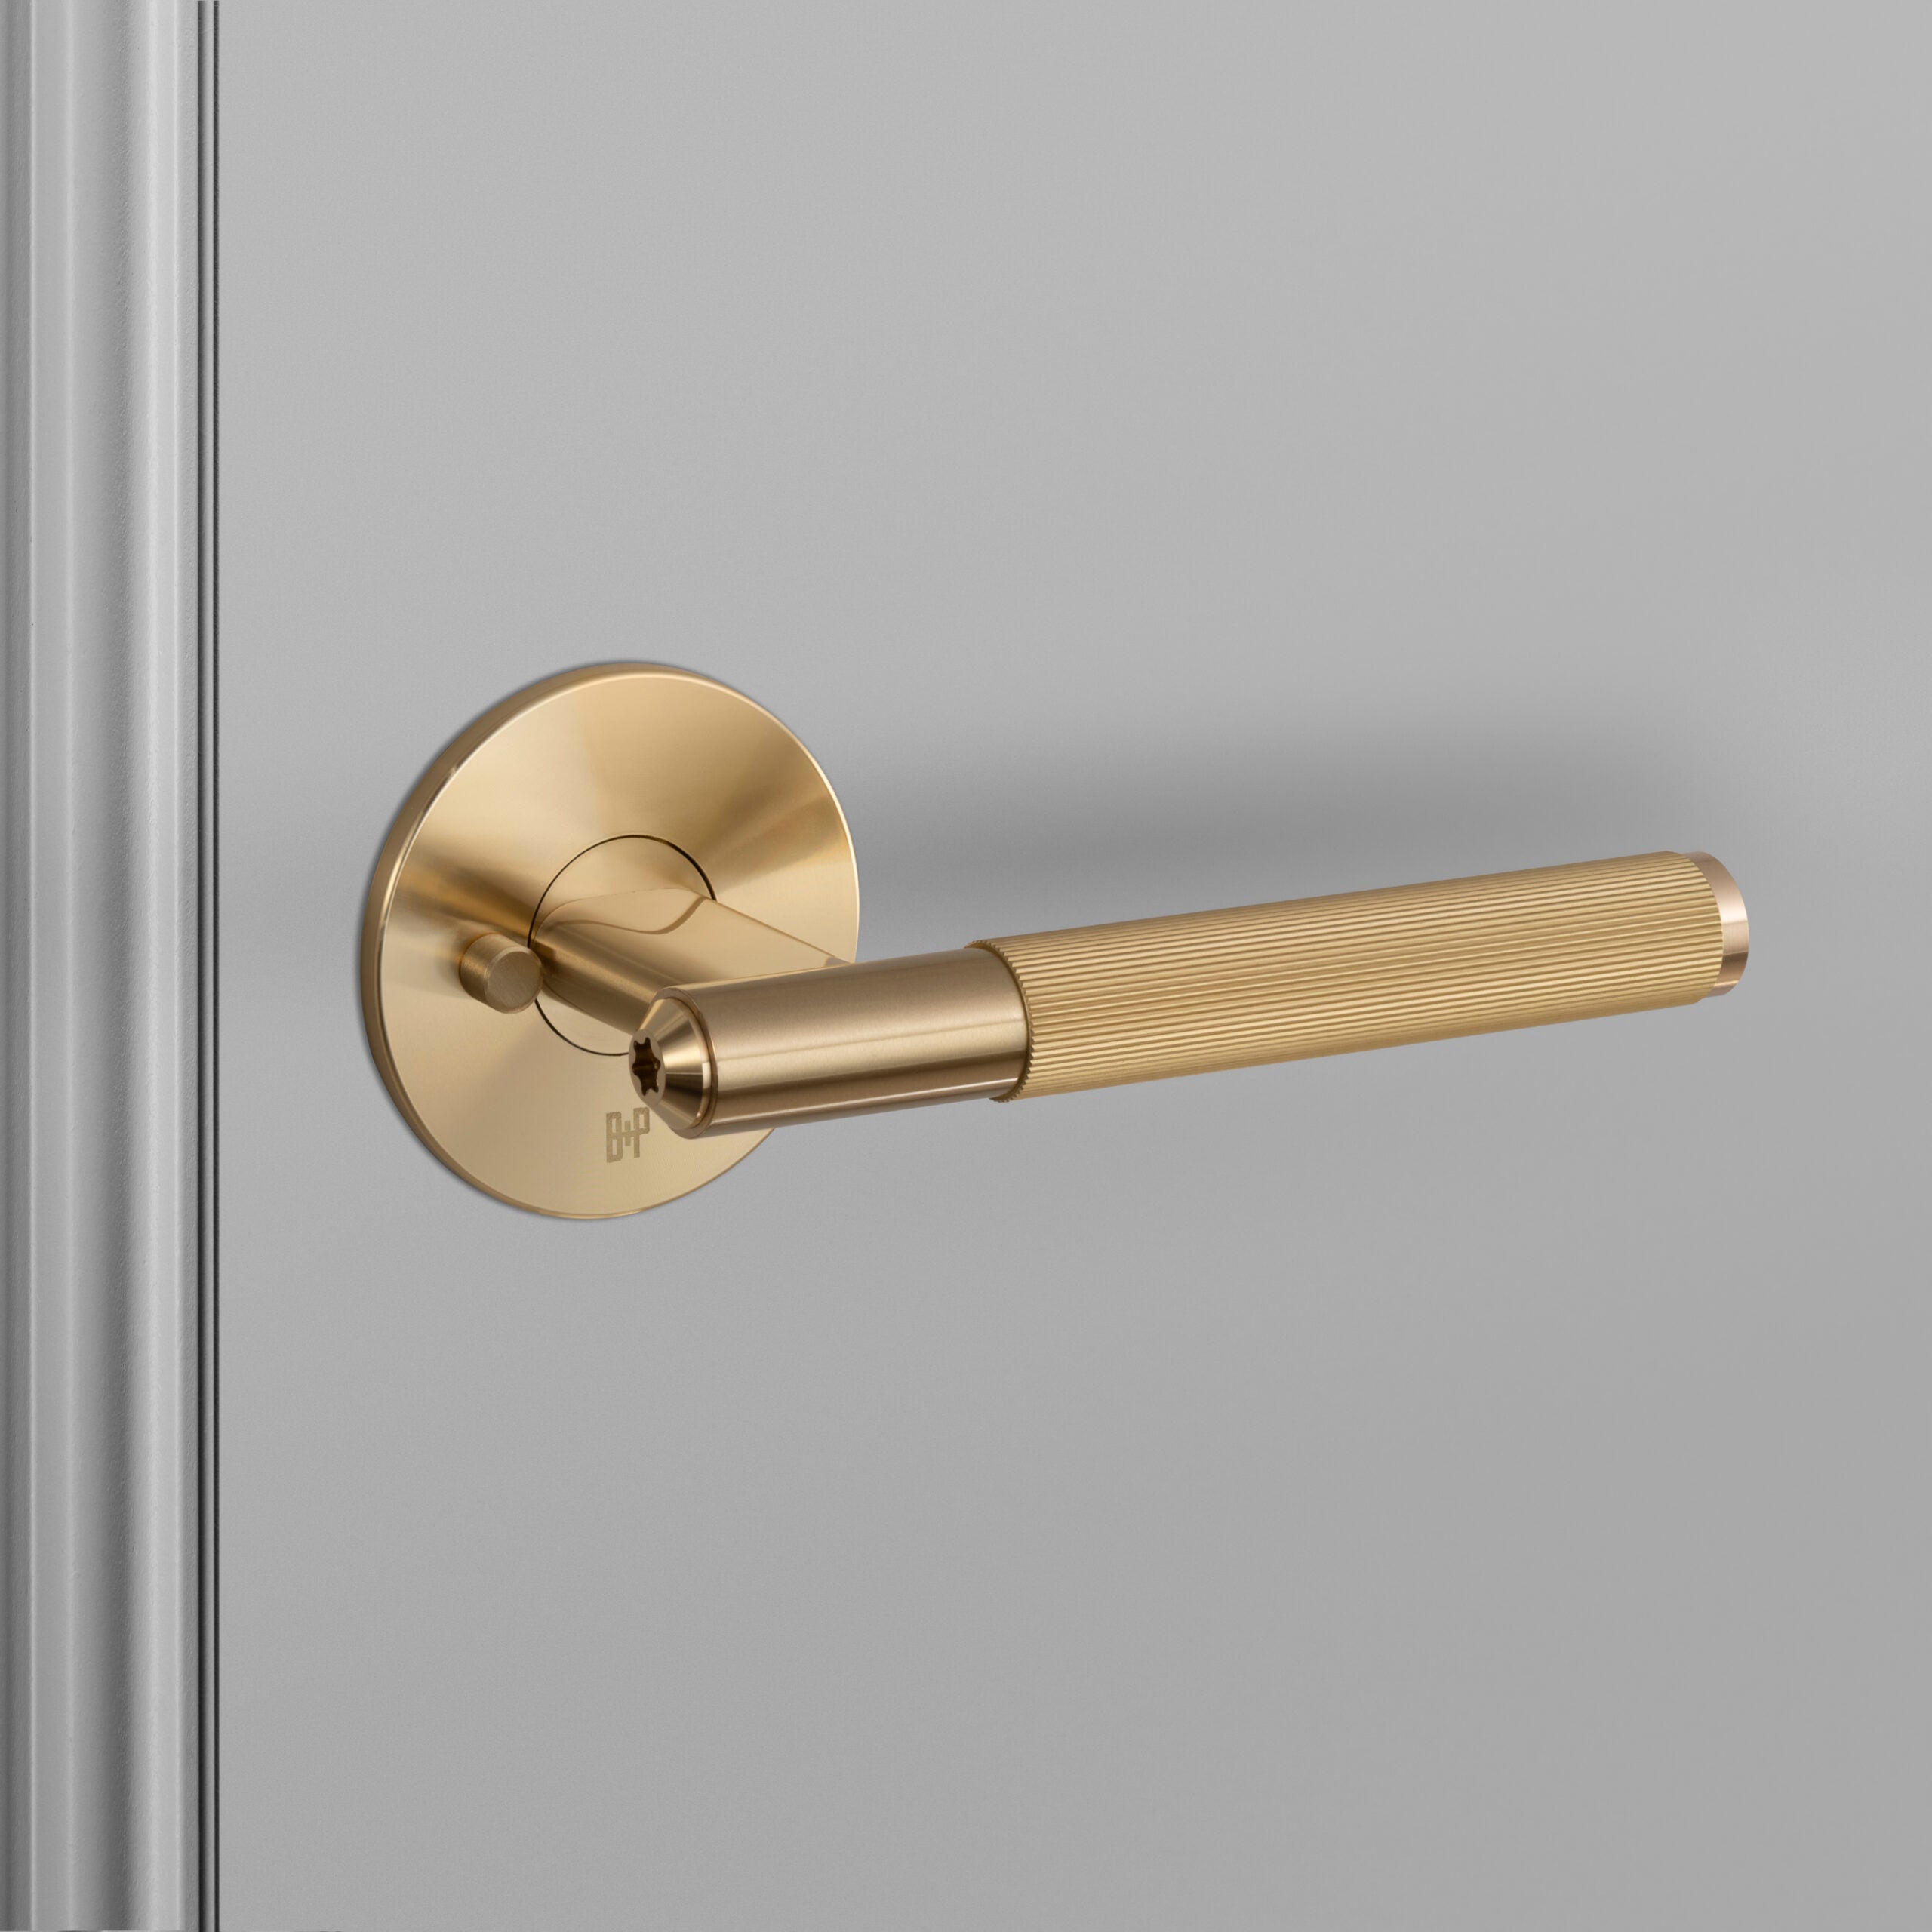 Buster + Punch Conventional Door Handle, Linear Design - PRIVACY TYPE Hardware Buster + Punch   